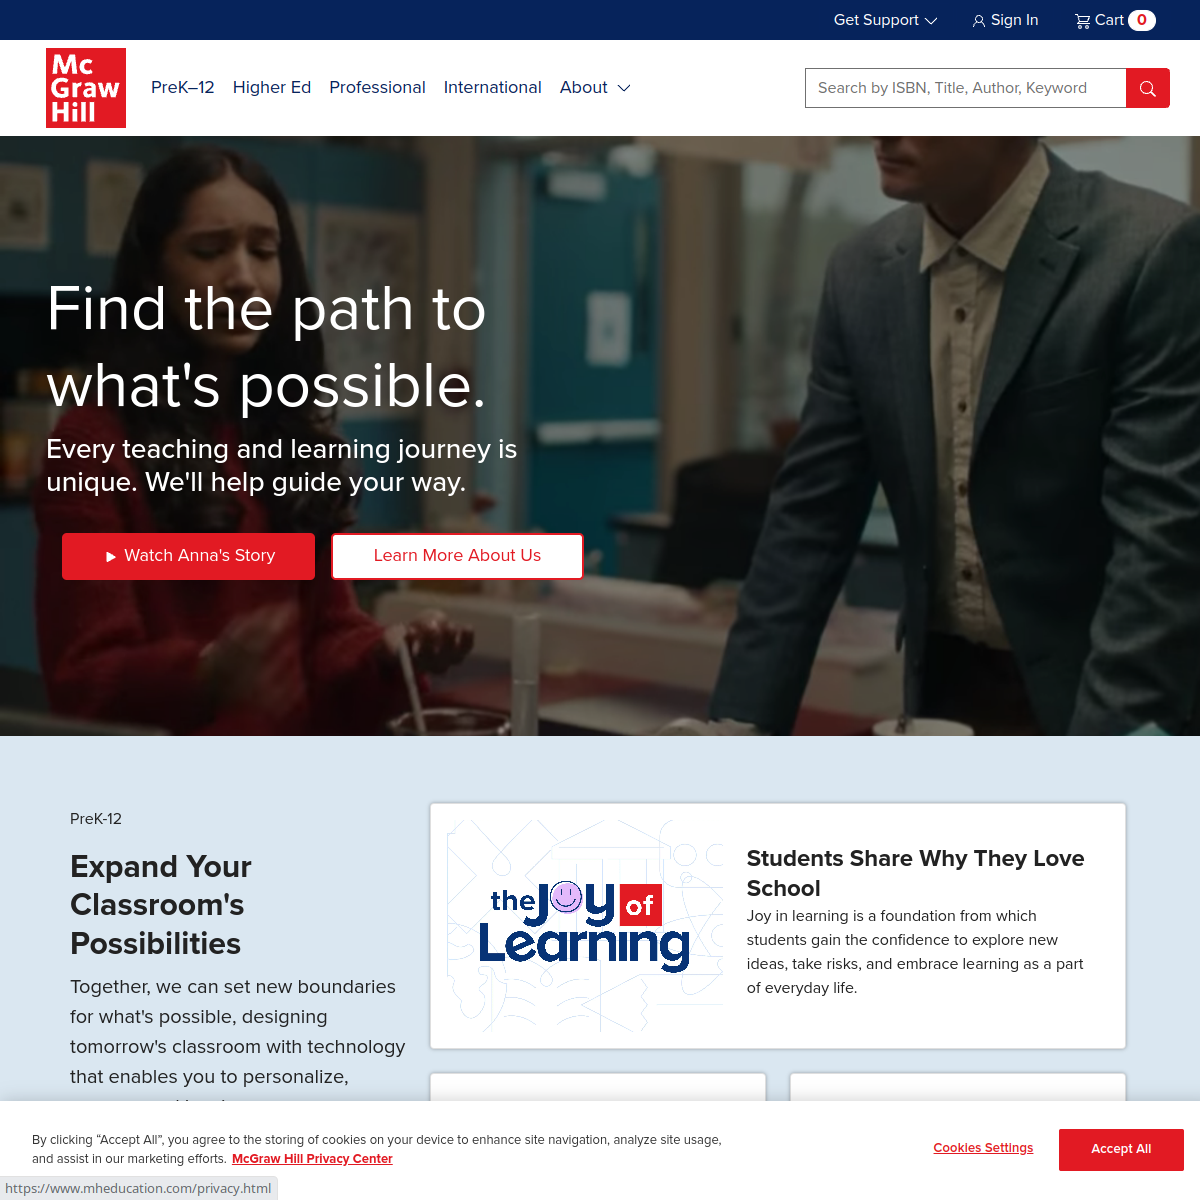 McGraw Hill Website Preview